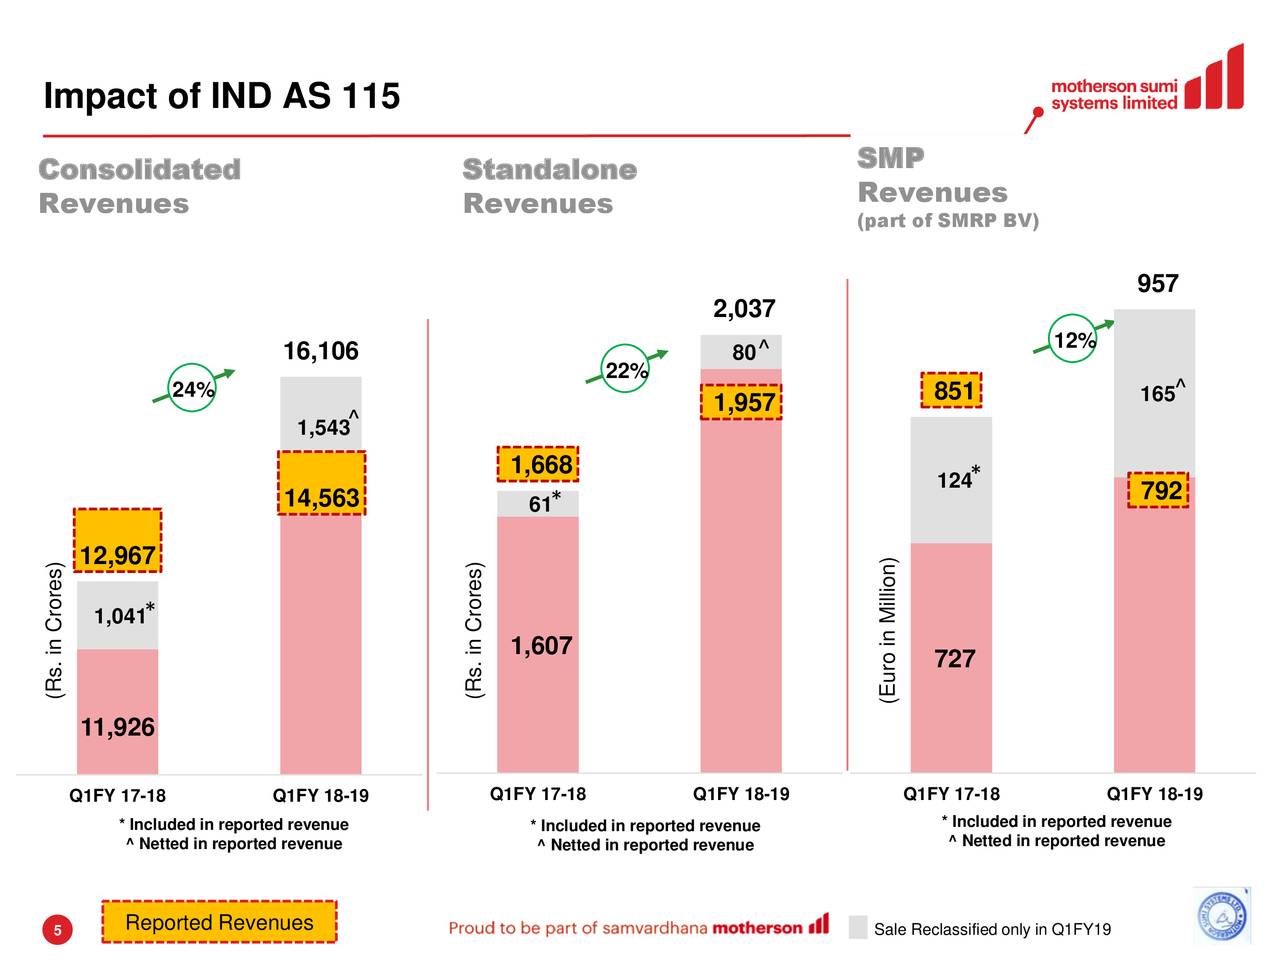 Impact of IND AS 115